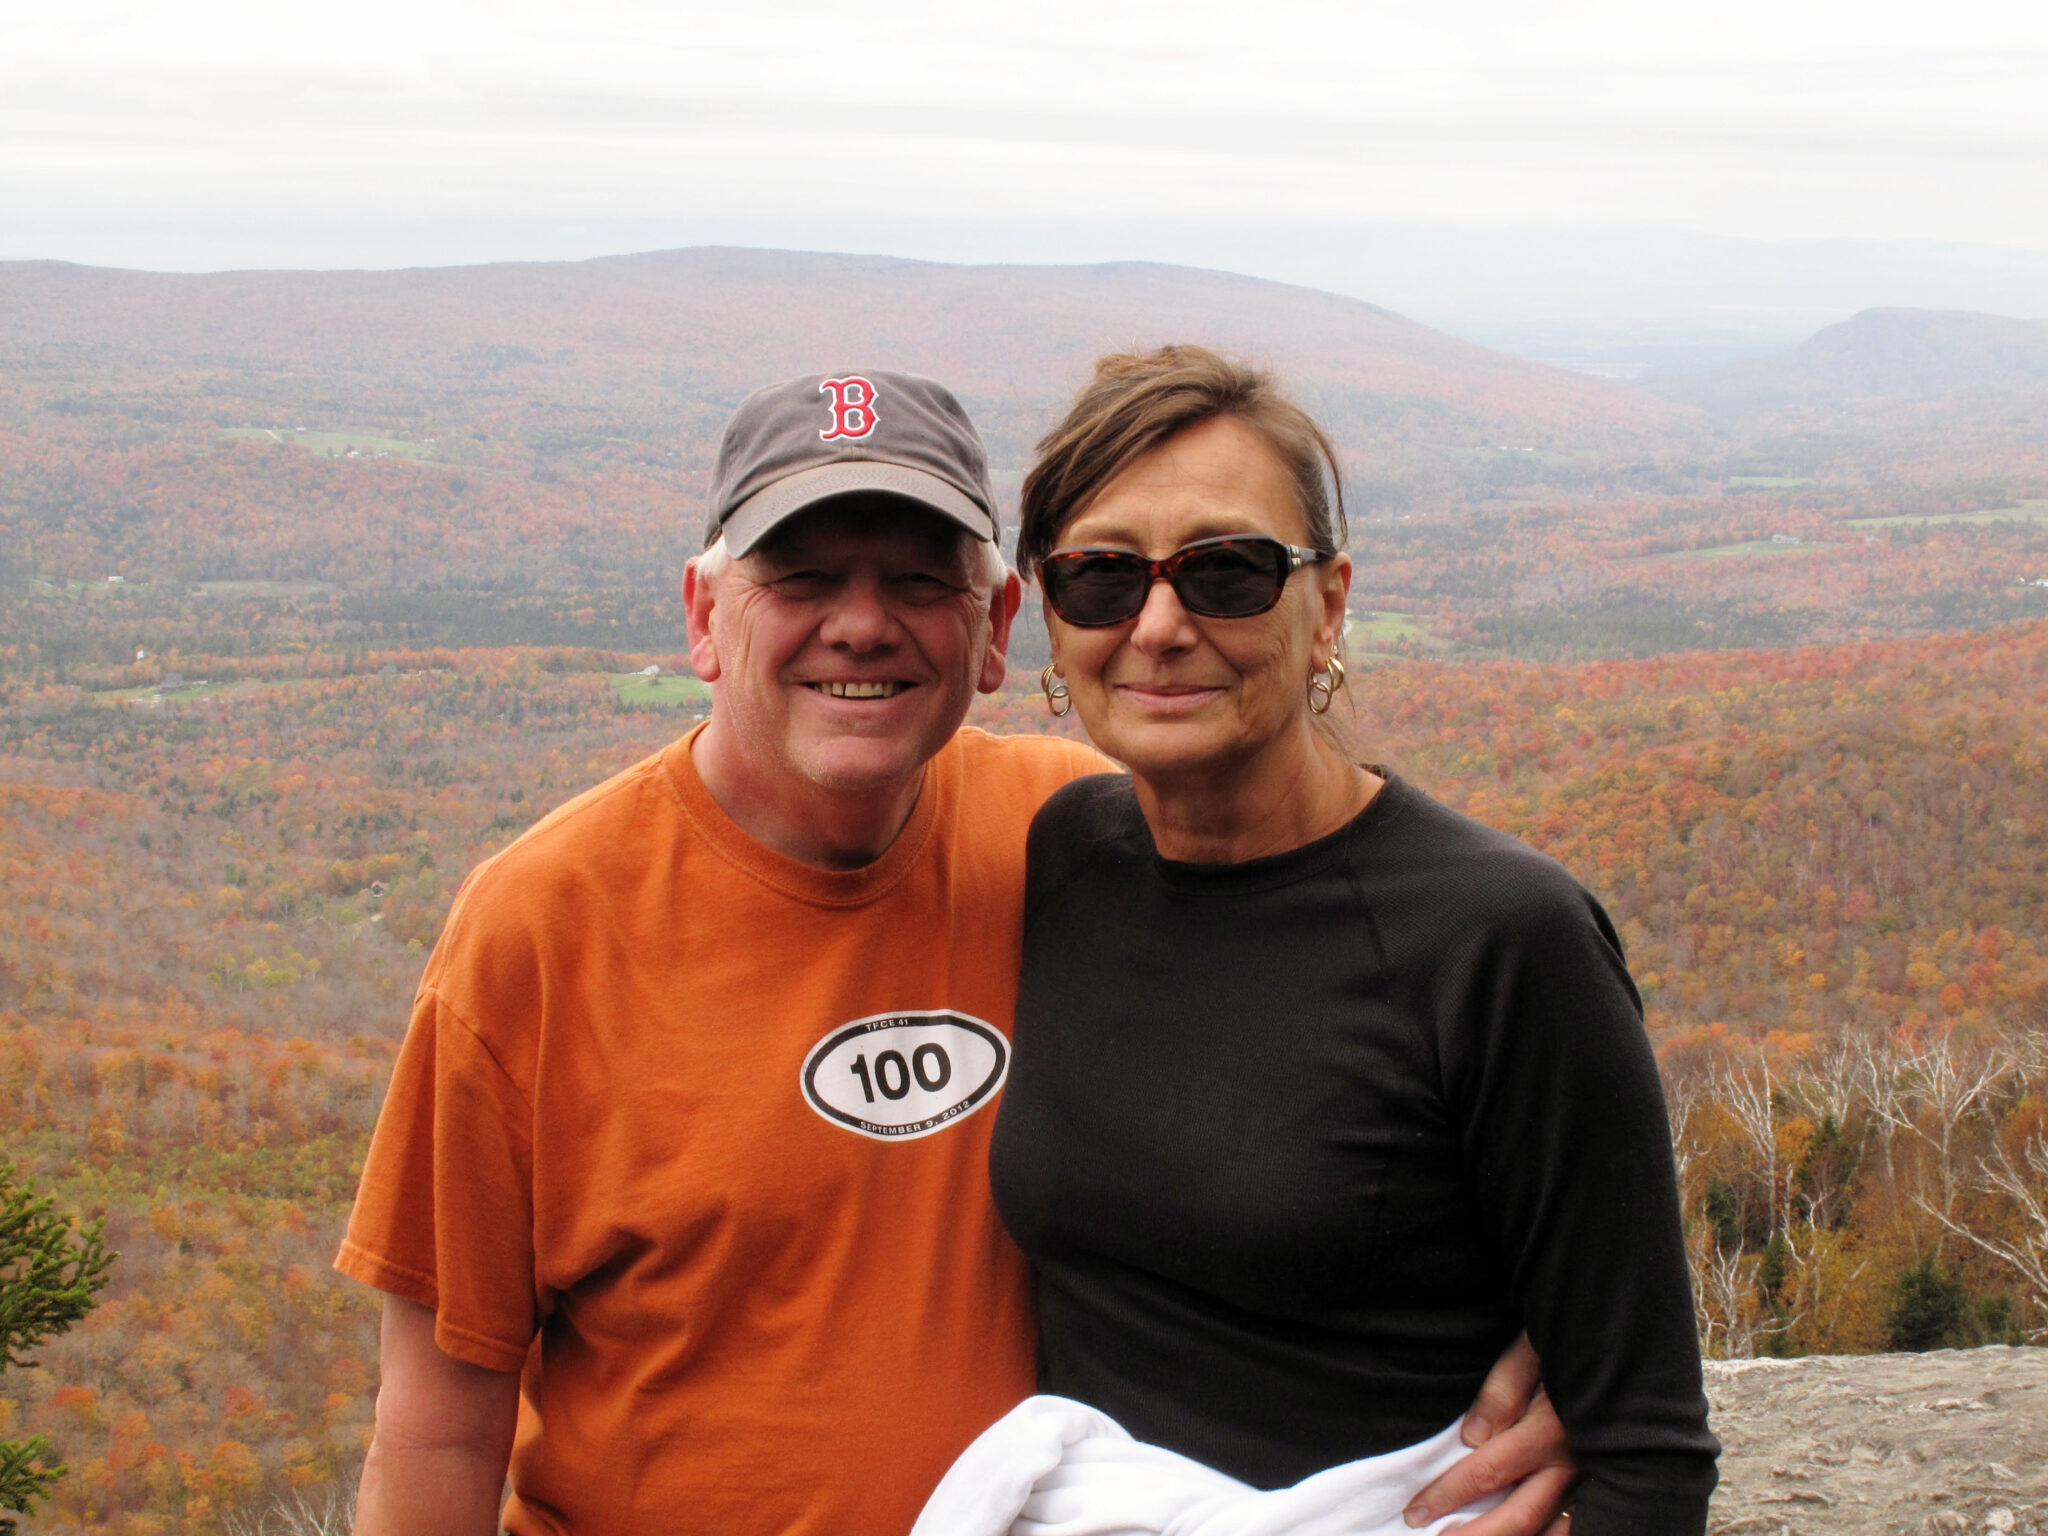 A man and woman embrace in front of a majestic outlook of orange foliage over a mountain range